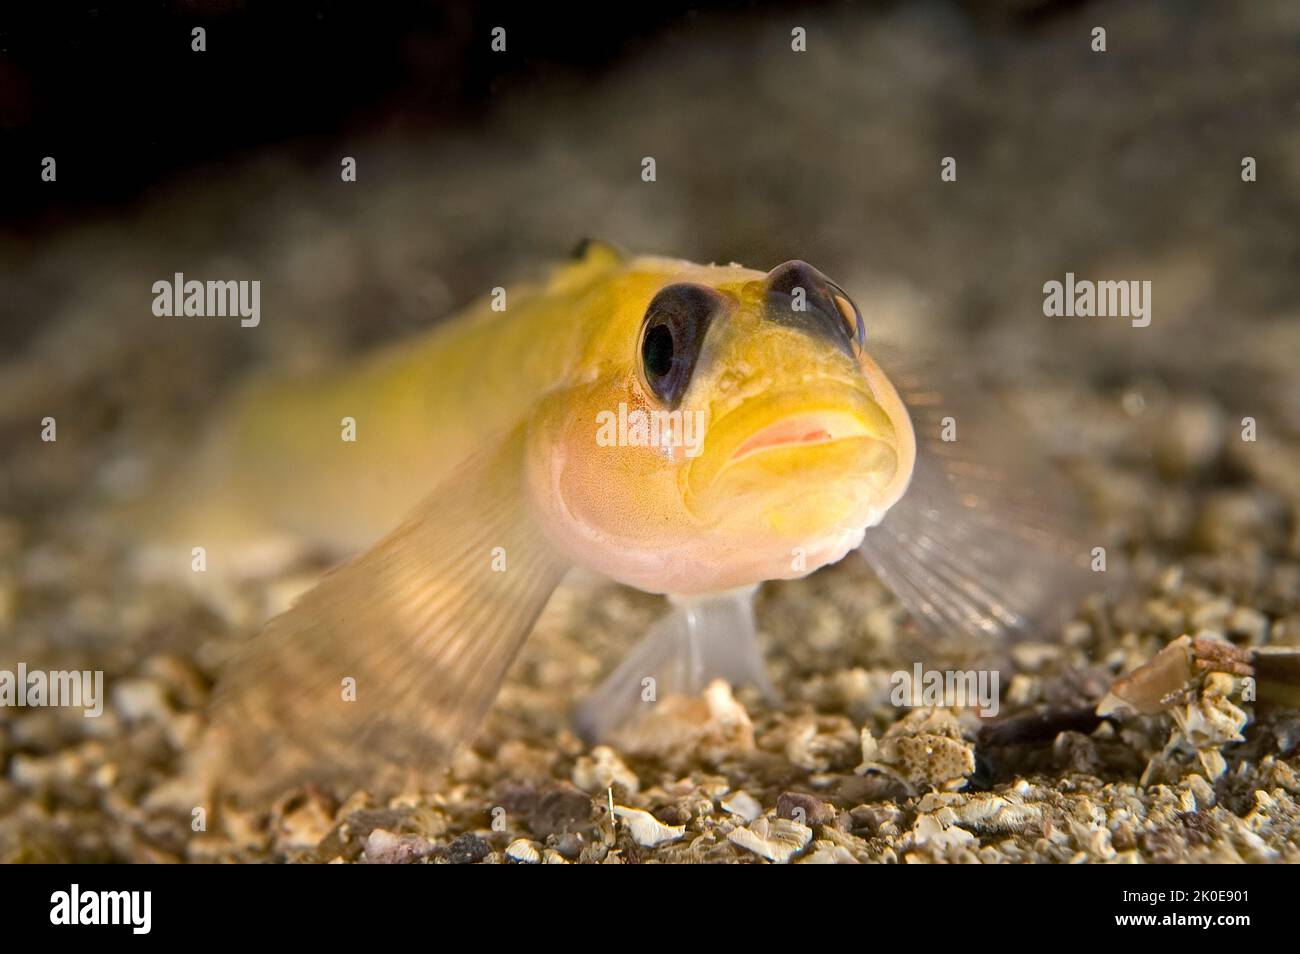 A common black eye goby rests on a sandy bottom off of Catalina Island in California's channel islands, carefully checking me out. Stock Photo